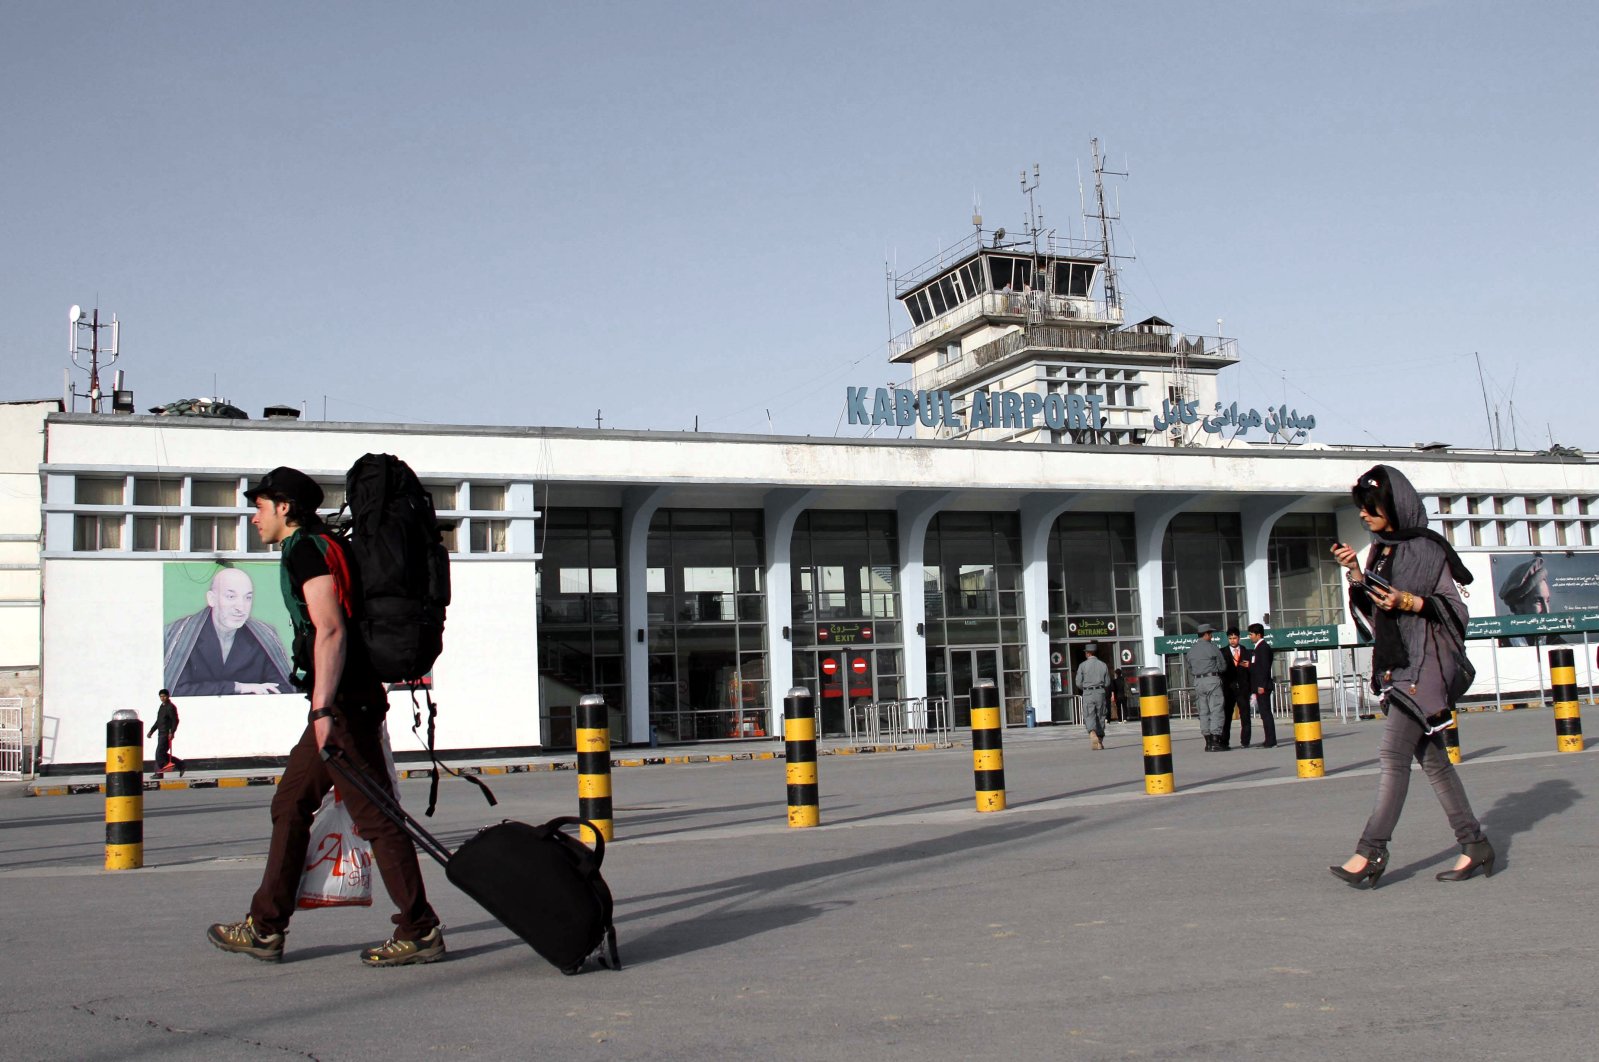 A picture showing passengers passing a portrait of Kabul Hamid Karzai International Airport, in Kabul, Afghanistan, March 26, 2012. (EPA-EFE Photo)